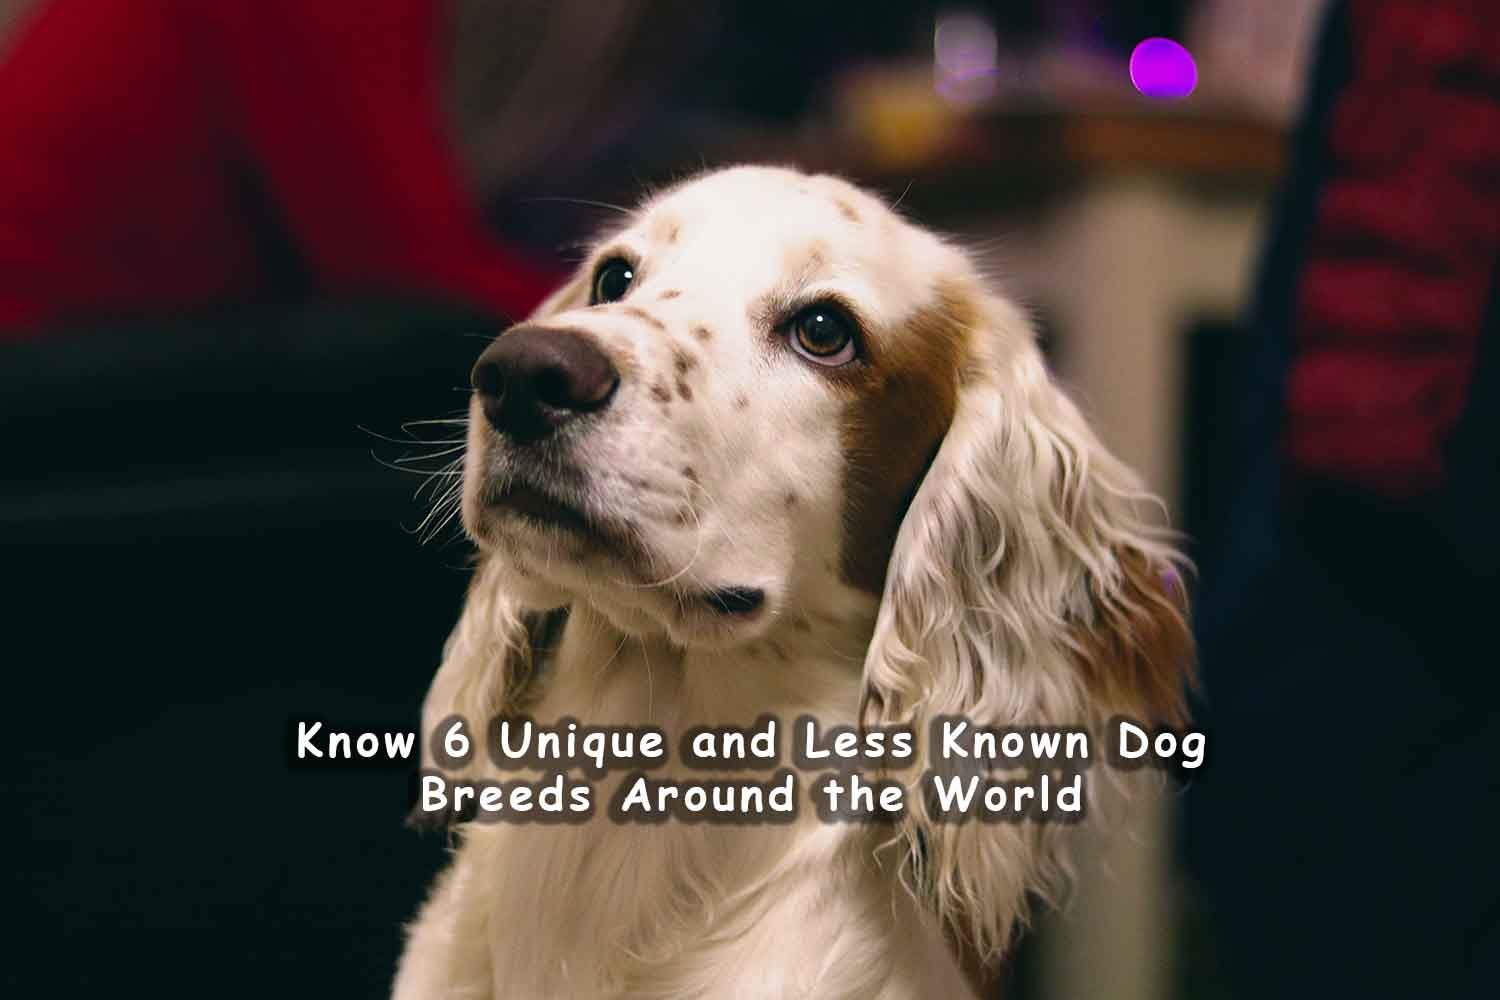 Know 6 unique and less known dog breeds around the world